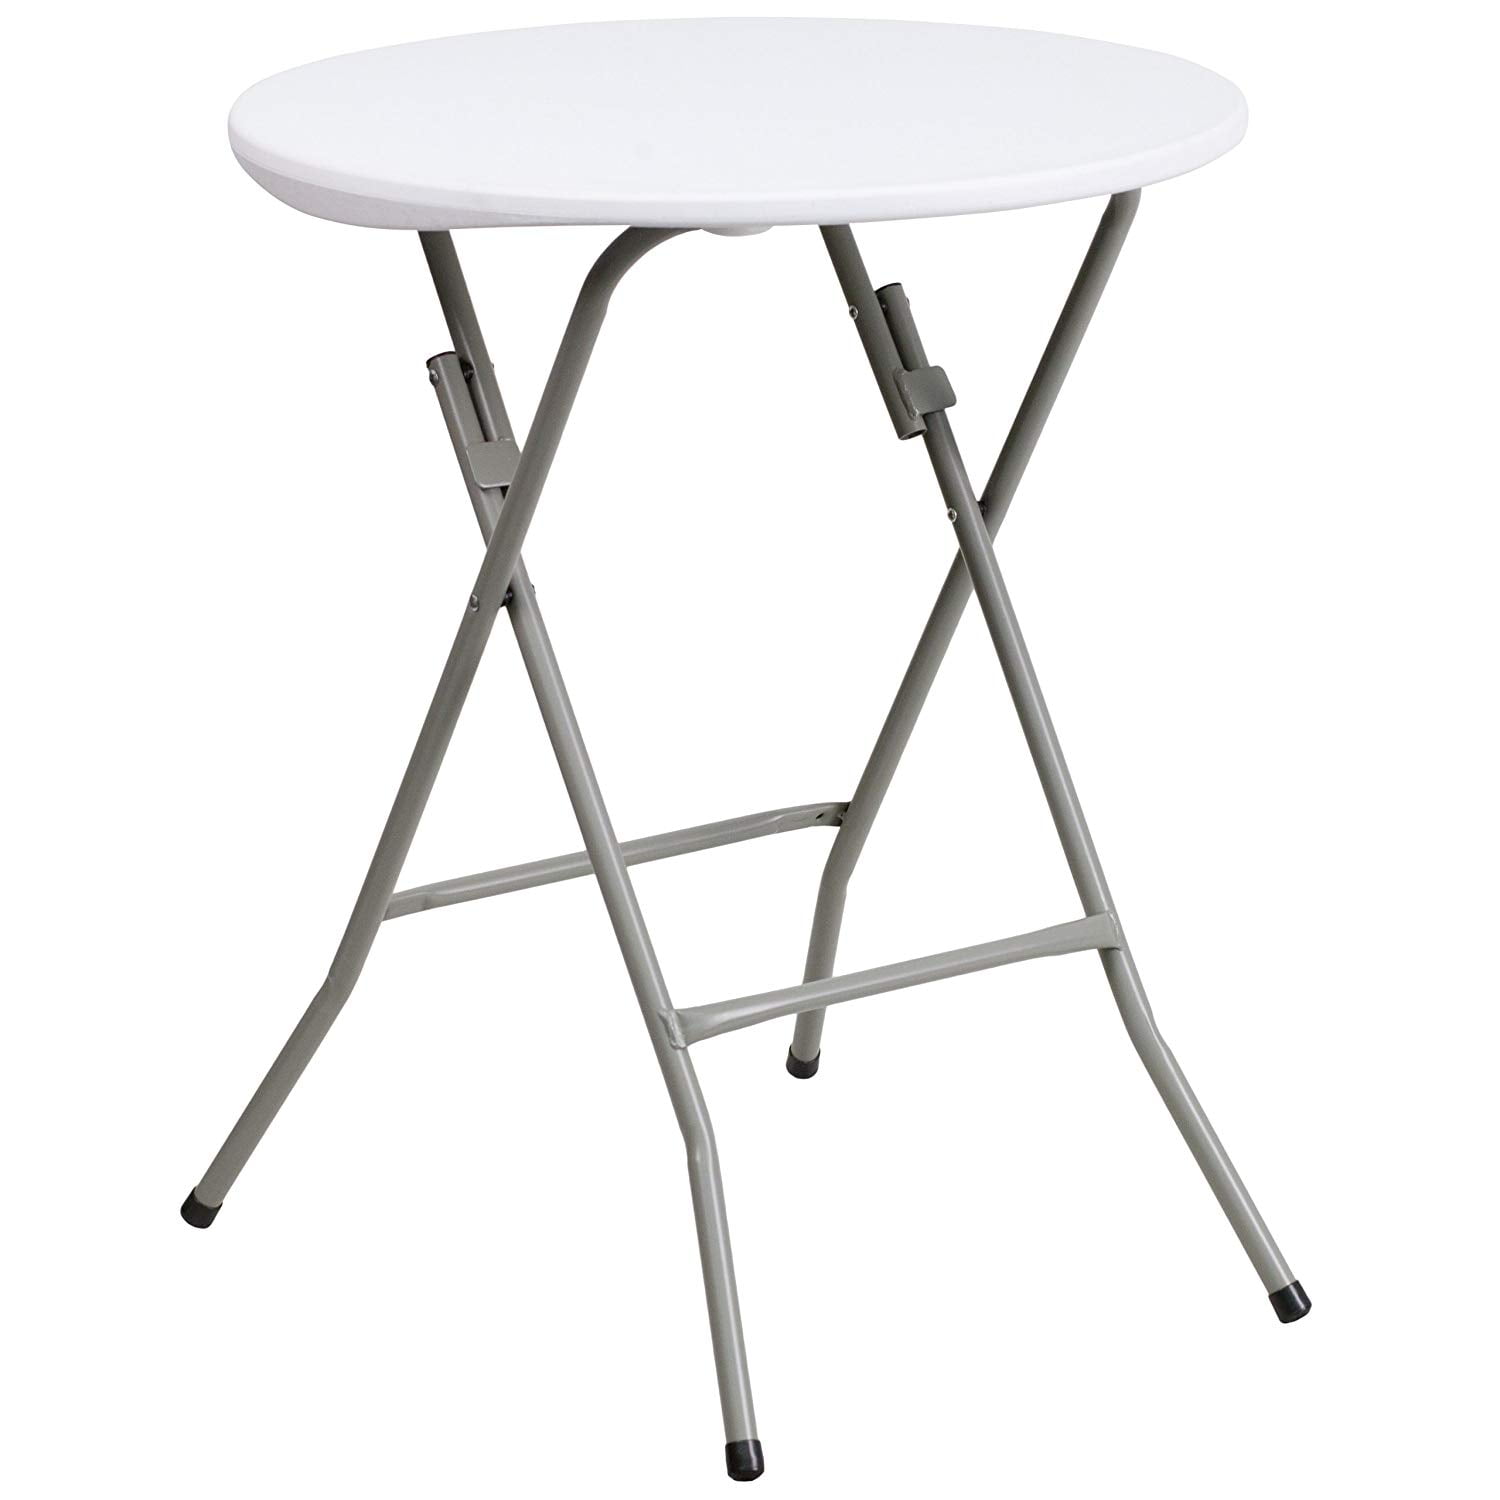 555890901 for sale online Mainstays 31 Inches Round Folding Table 